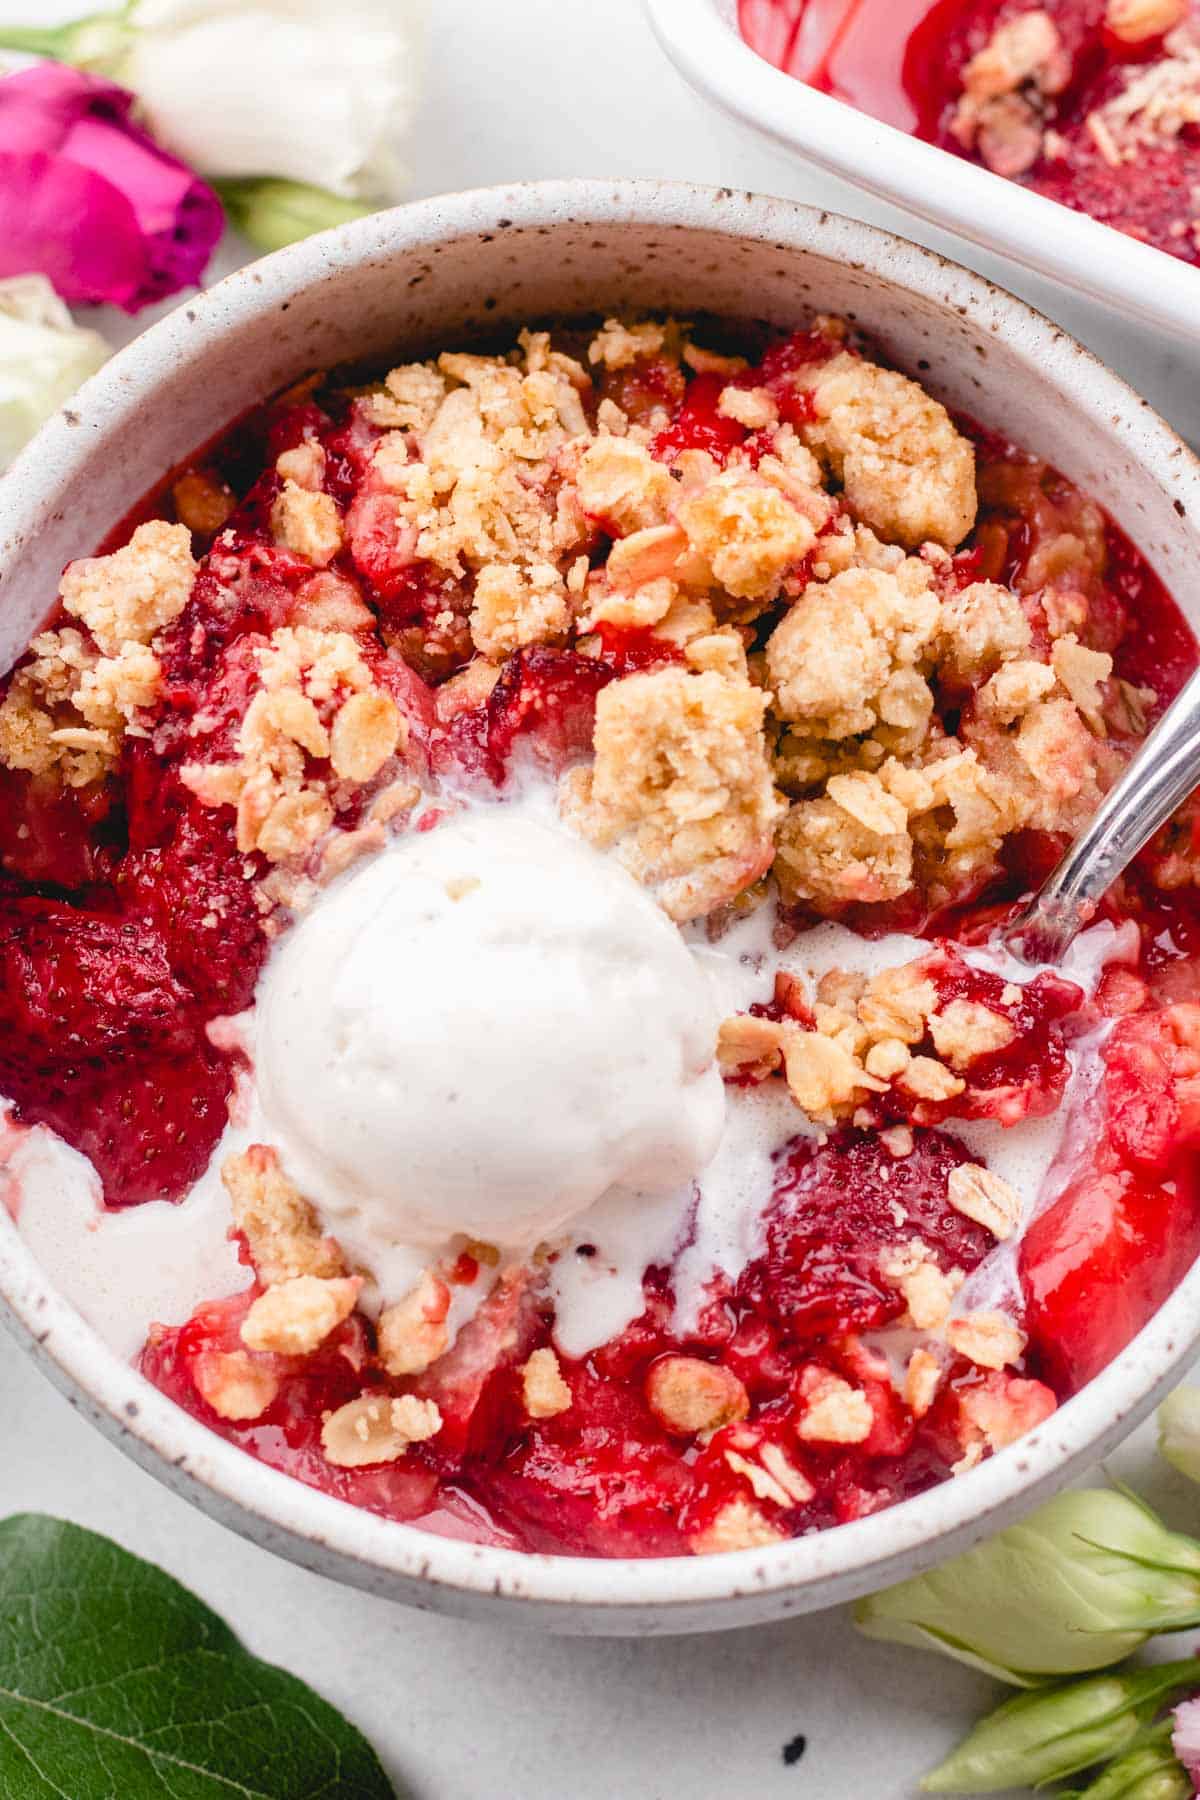 Scooping out strawberry crumble with a spoon, topped with ice cream.